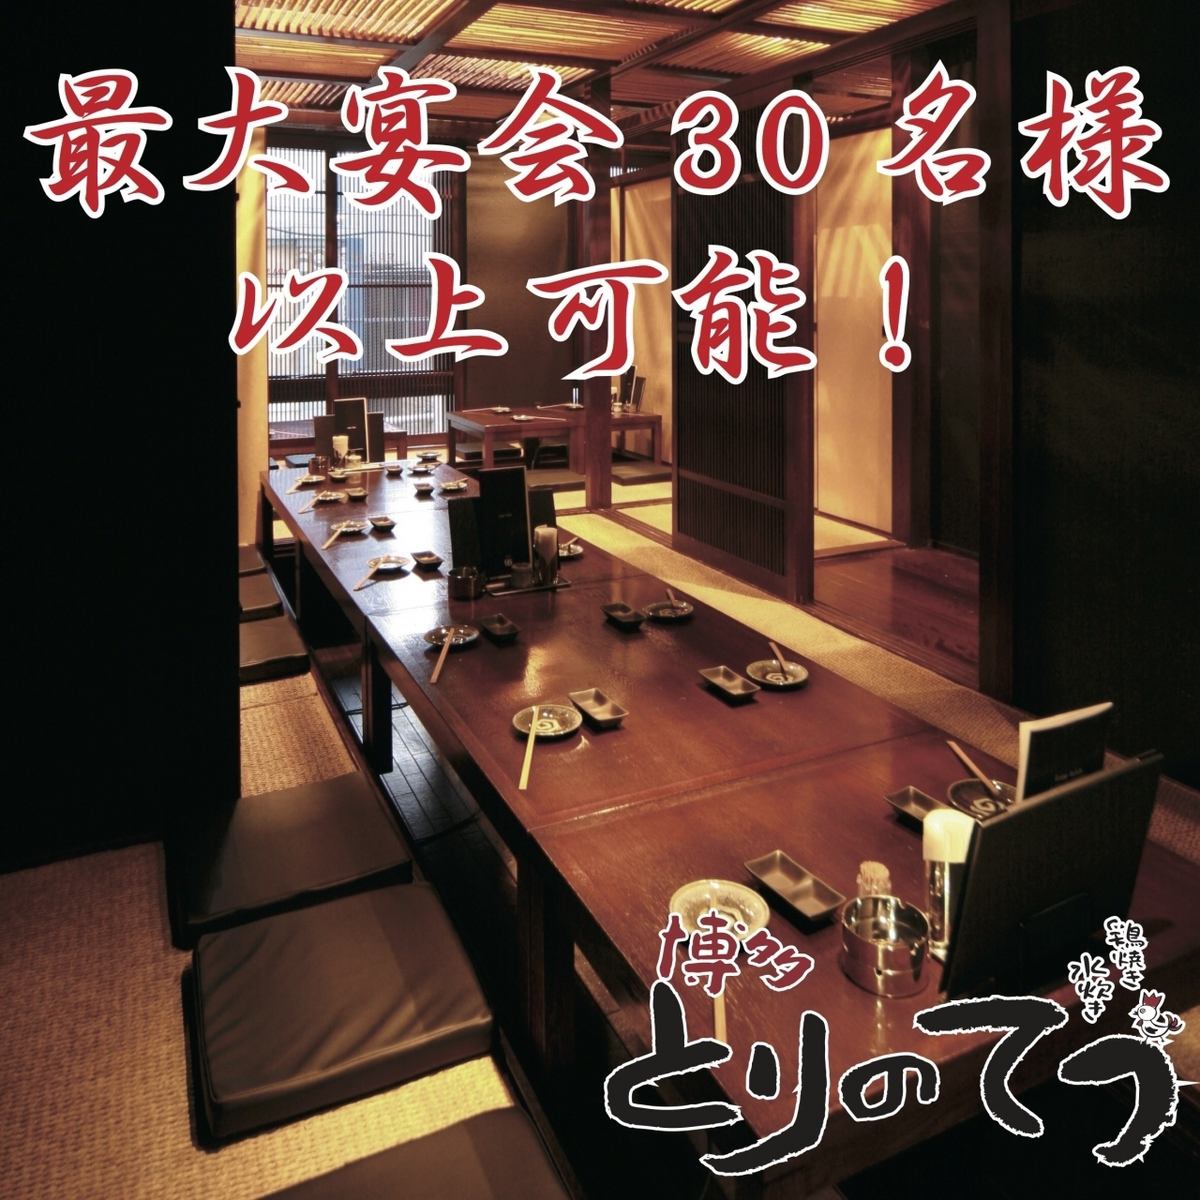 Completely private rooms available for up to 36 people♪ Courses start from 4,000 yen